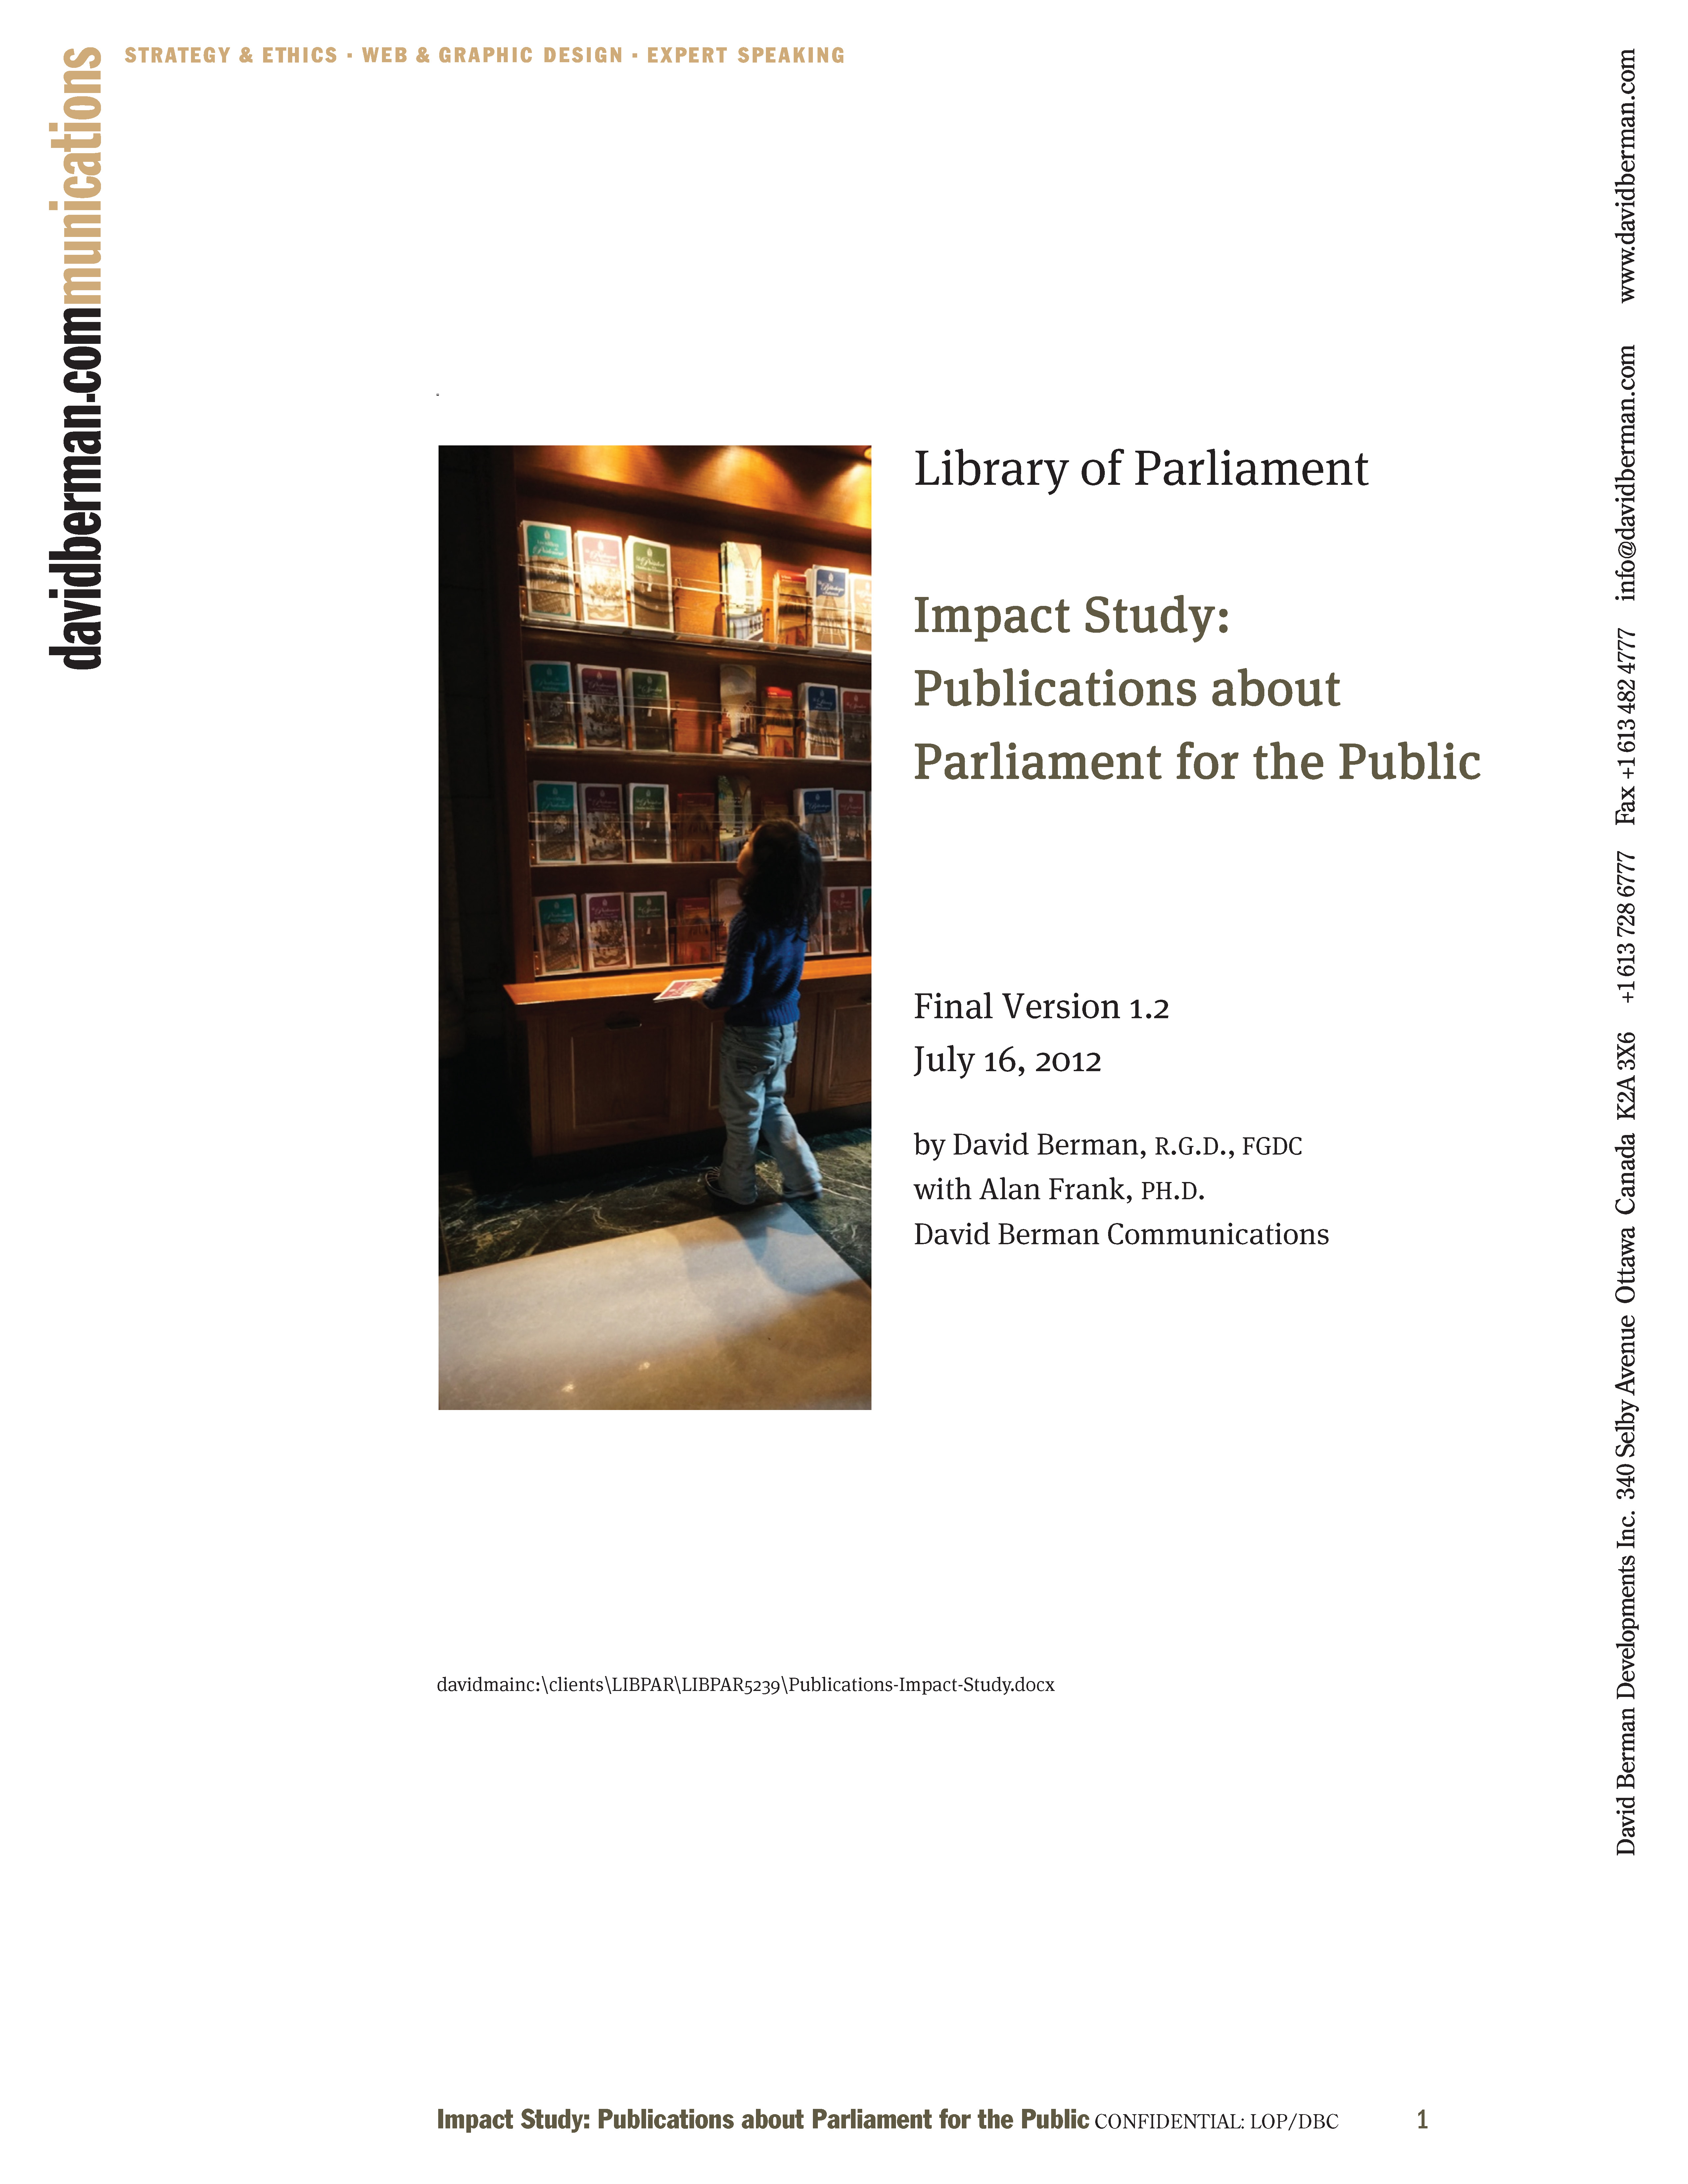 Image of the cover page of Library of Parliament